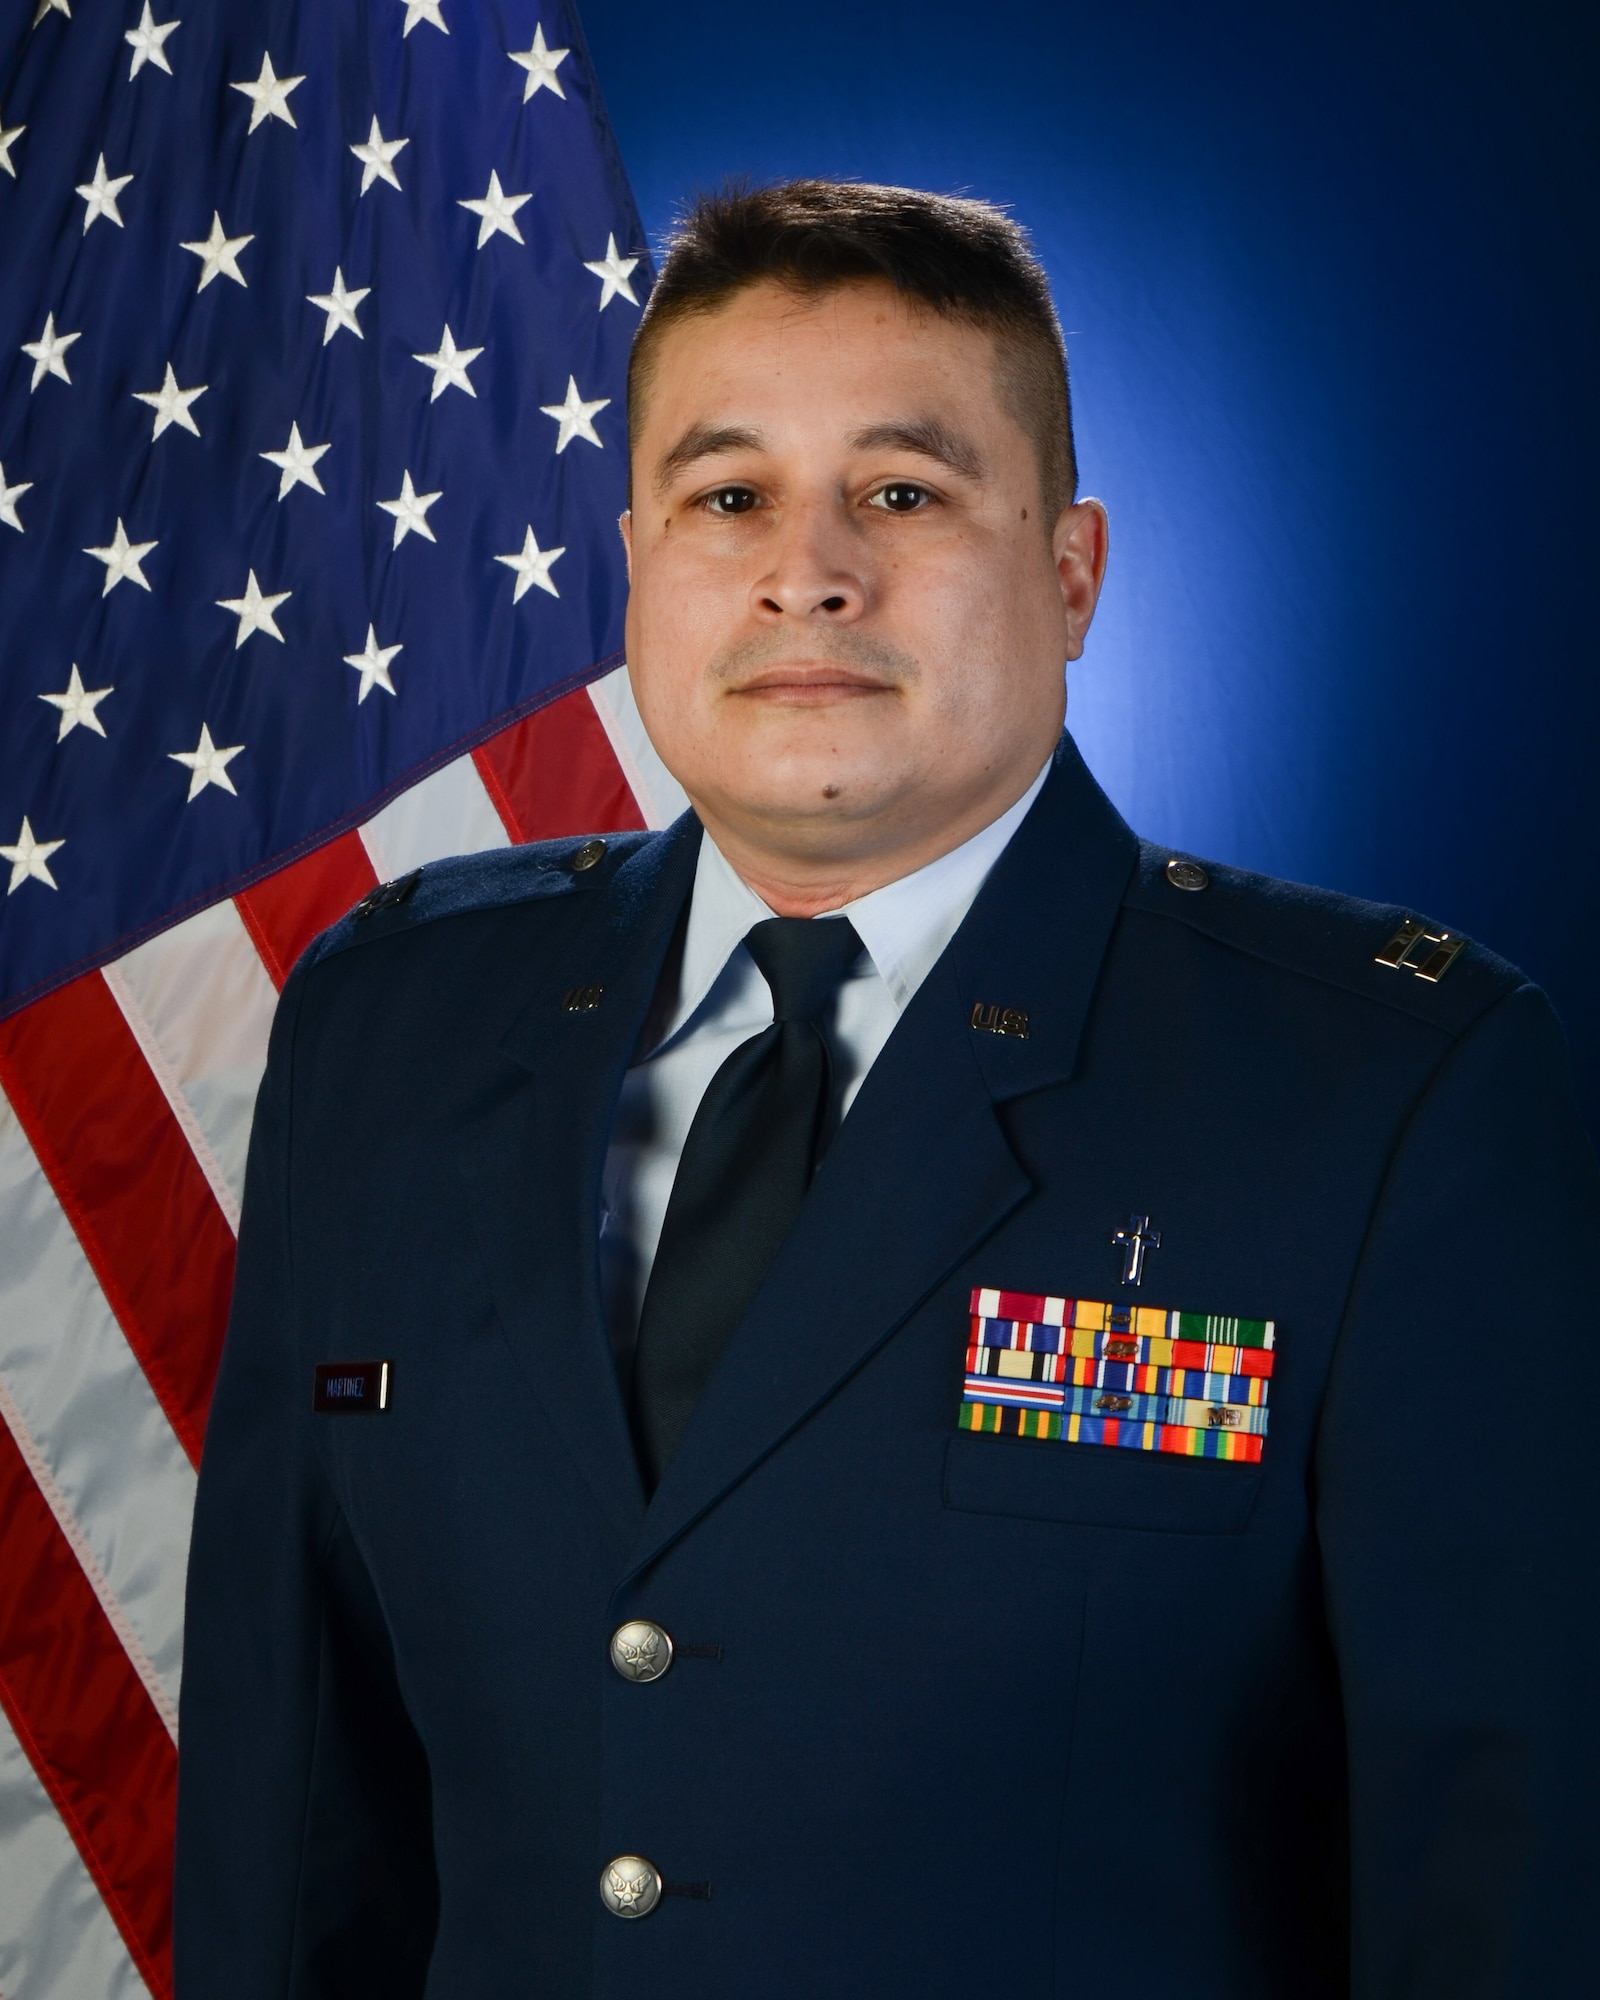 The official portrait of U.S. Air Force Capt. Jose Martinez, a chaplain with the 139th Airlift Wing, Missouri Air National Guard.(U.S. Air National Guard photo by: Staff Sgt. Patrick P. Evenson/Released)